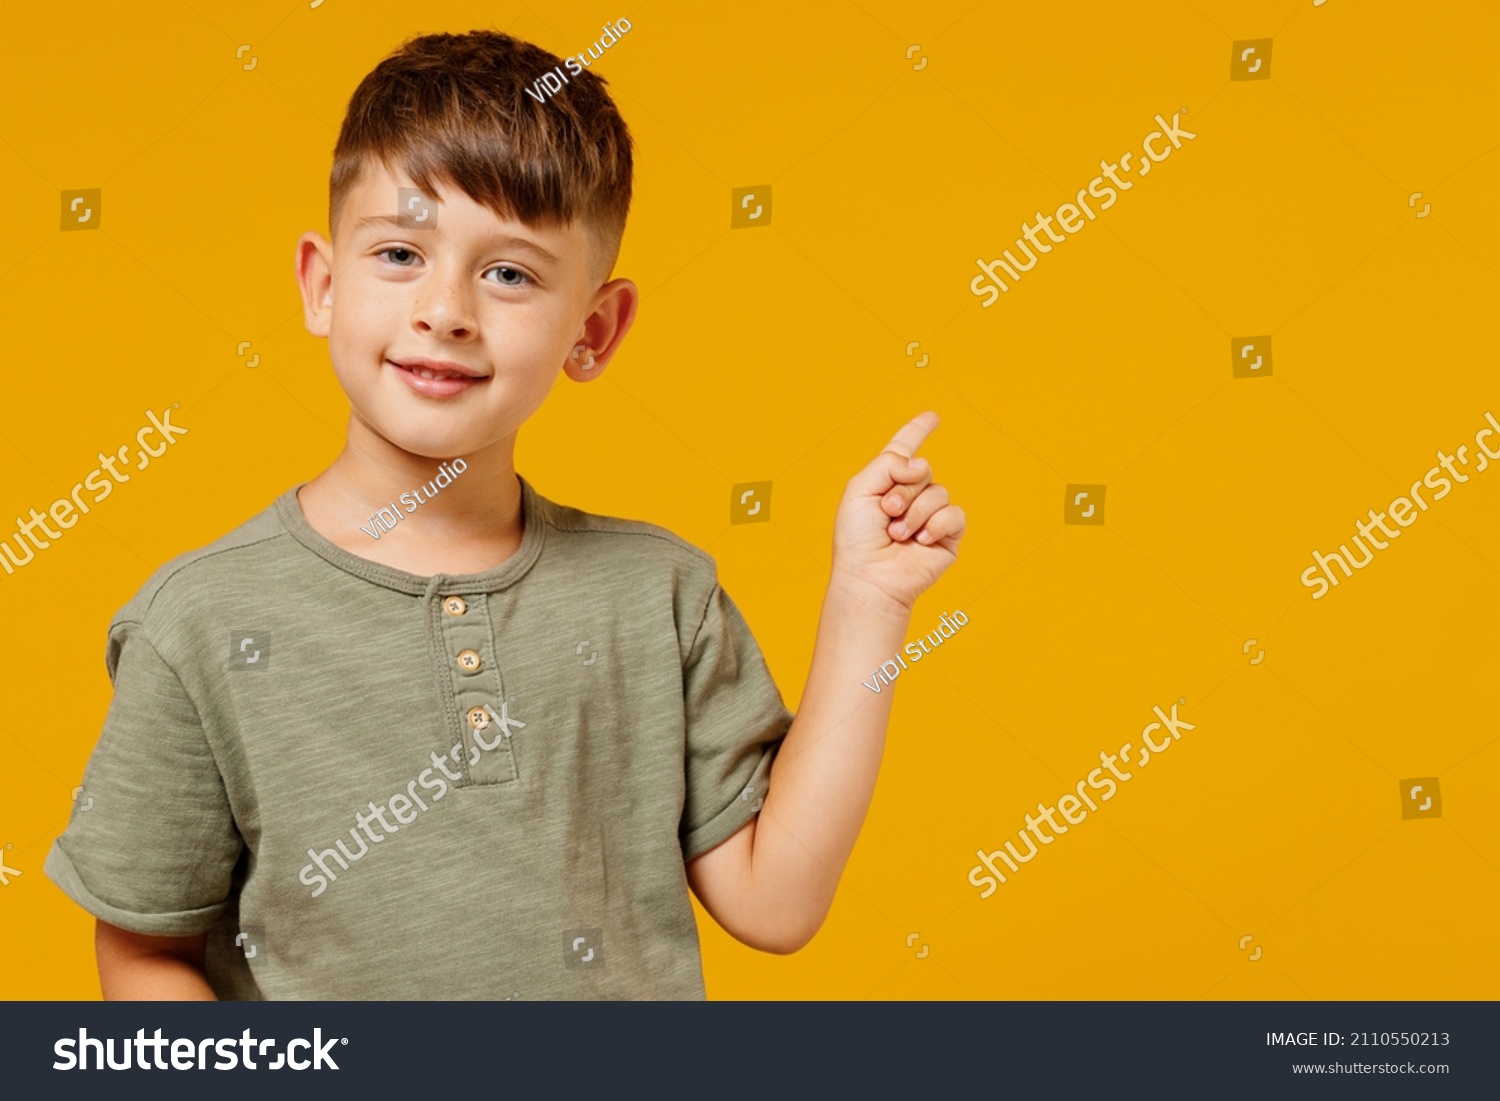 Little small happy boy 6-7 years old in green casual t-shirt point index finger aside on workspace area isolated on plain yellow background studio portrait. Mother's Day love family lifestyle concept. #2110550213